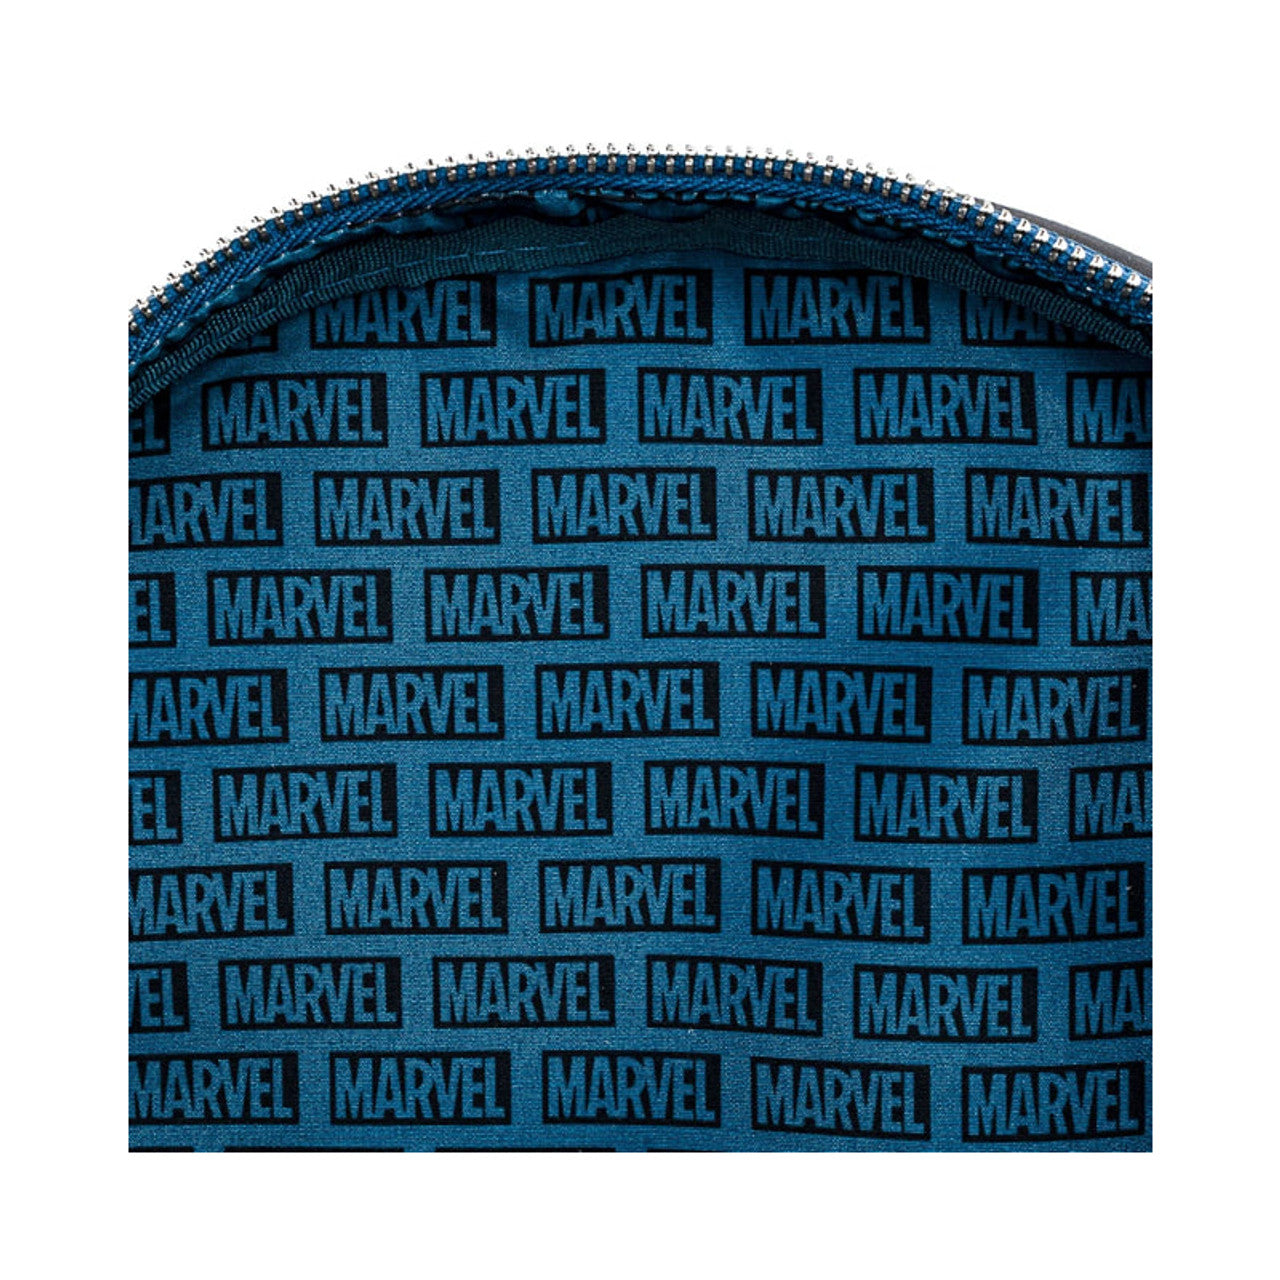 Loungefly Marvel Skottie Young Chibi Group Mini Backpack